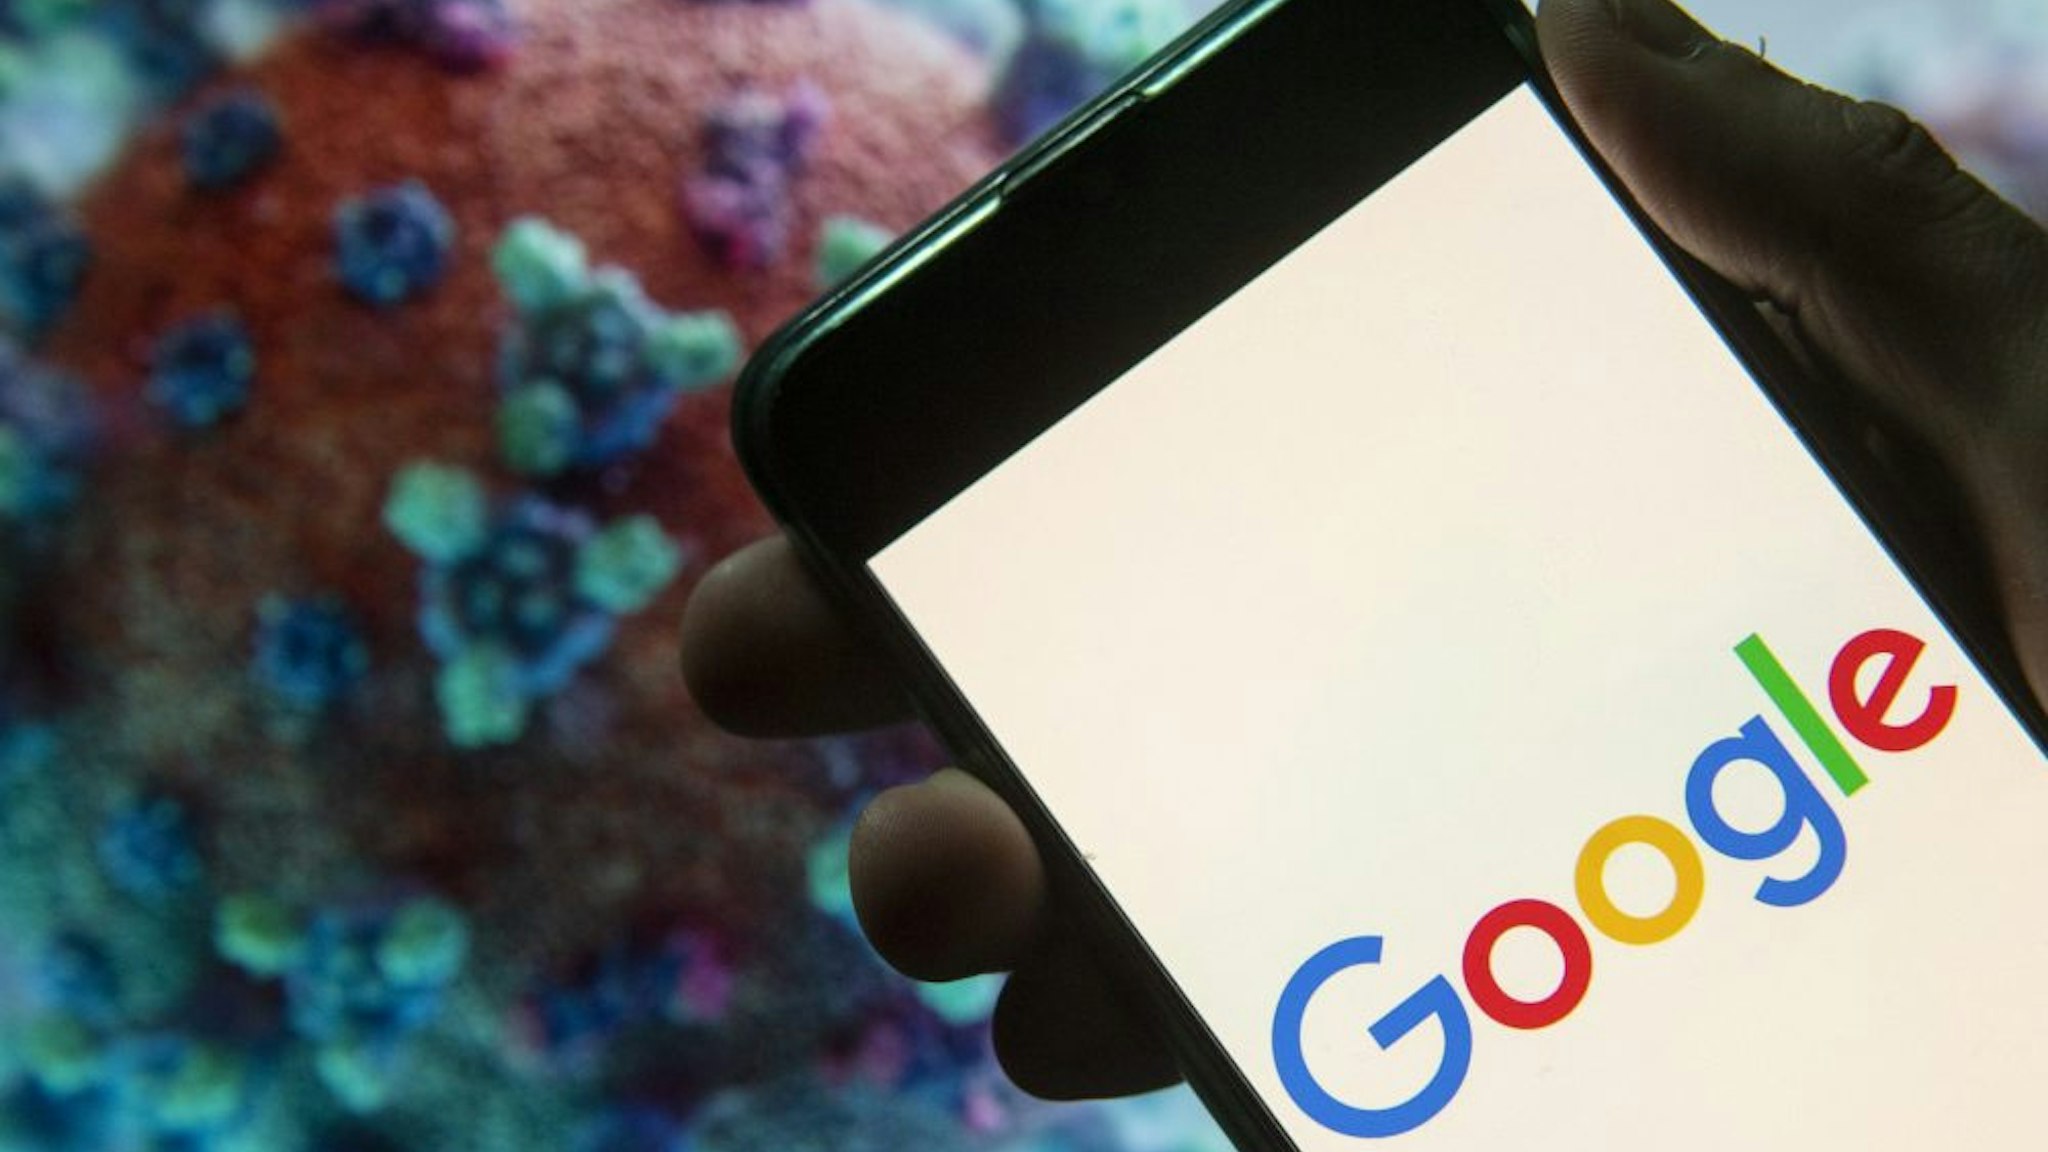 CHINA - 2020/03/23: In this photo illustration the American multinational technology company and search engine Google logo seen displayed on a smartphone with a computer model of the COVID-19 coronavirus on the background.